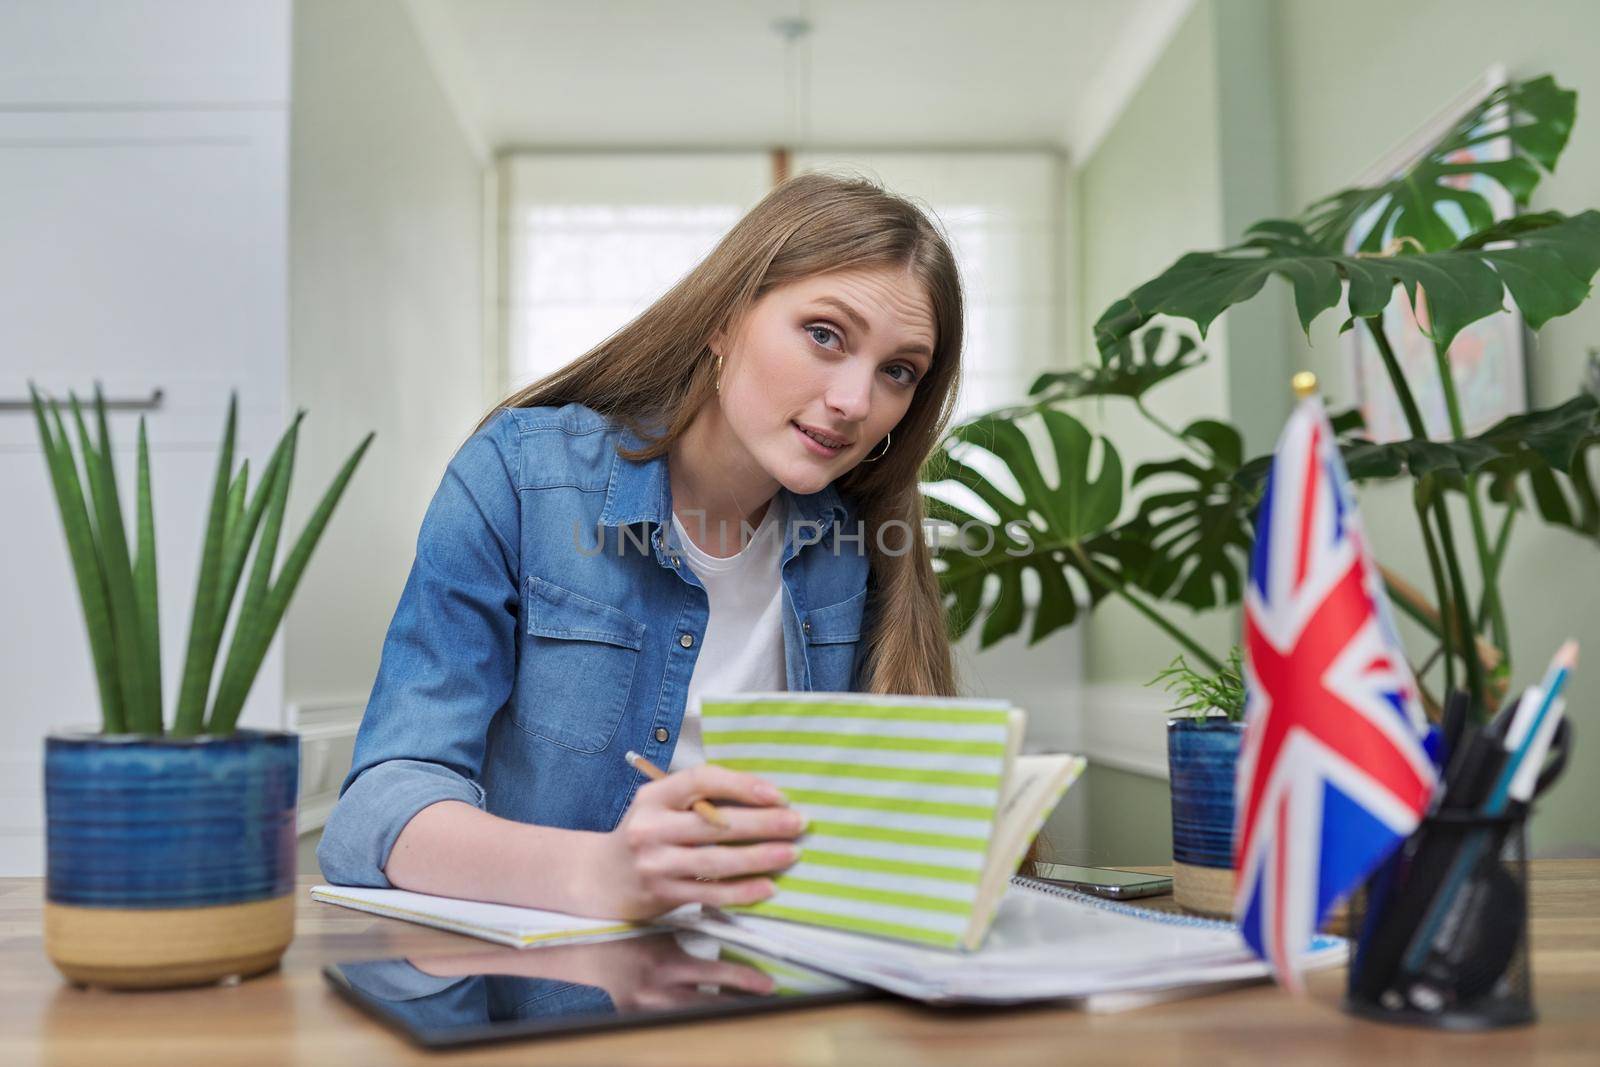 UK learning English online. Female student remotely looking at webcam taking private lessons sitting at home in kitchen, England flag background